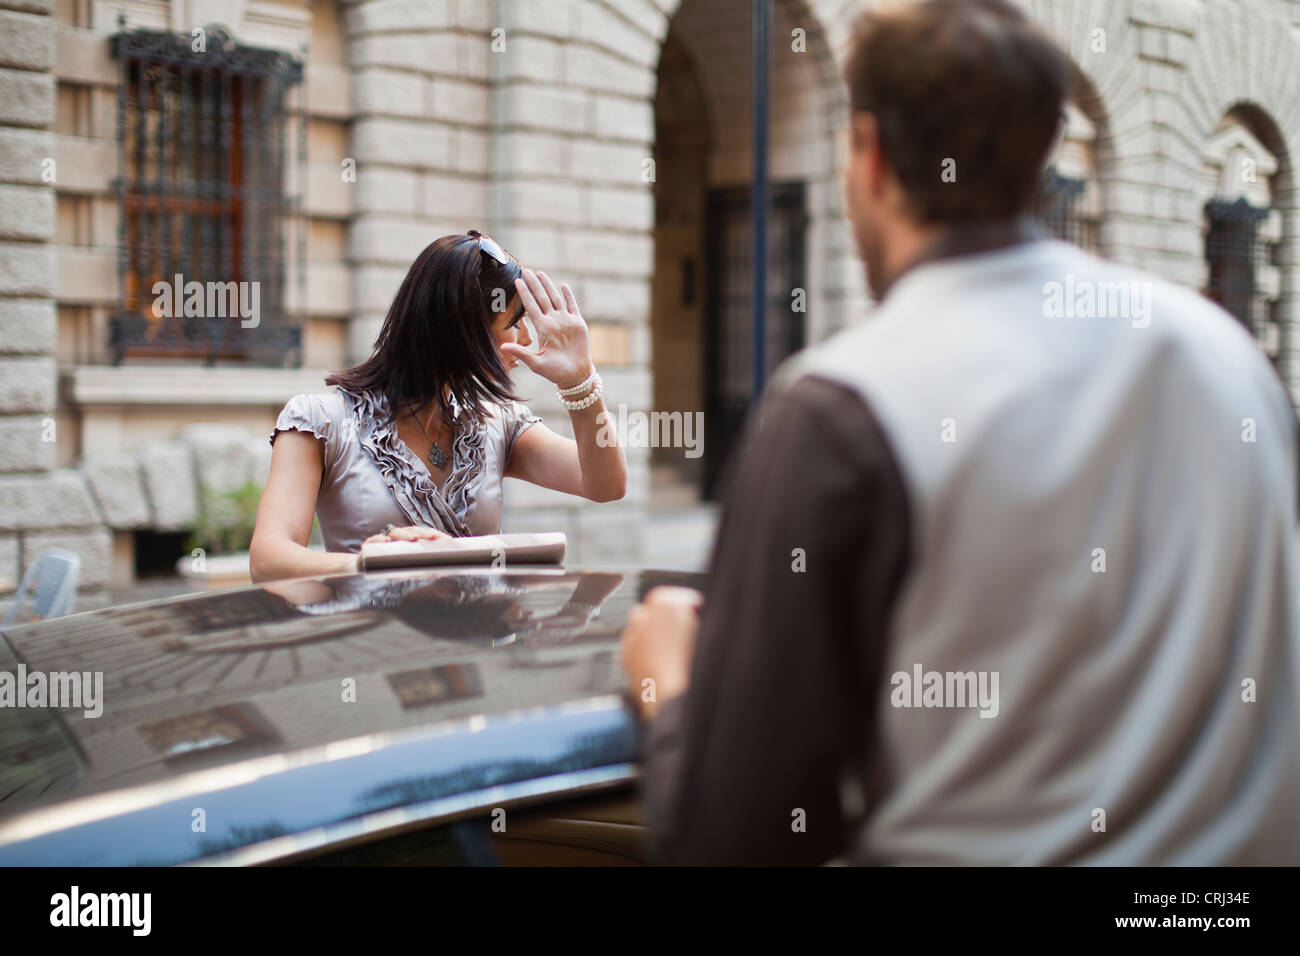 Couple arguing over sports car Stock Photo